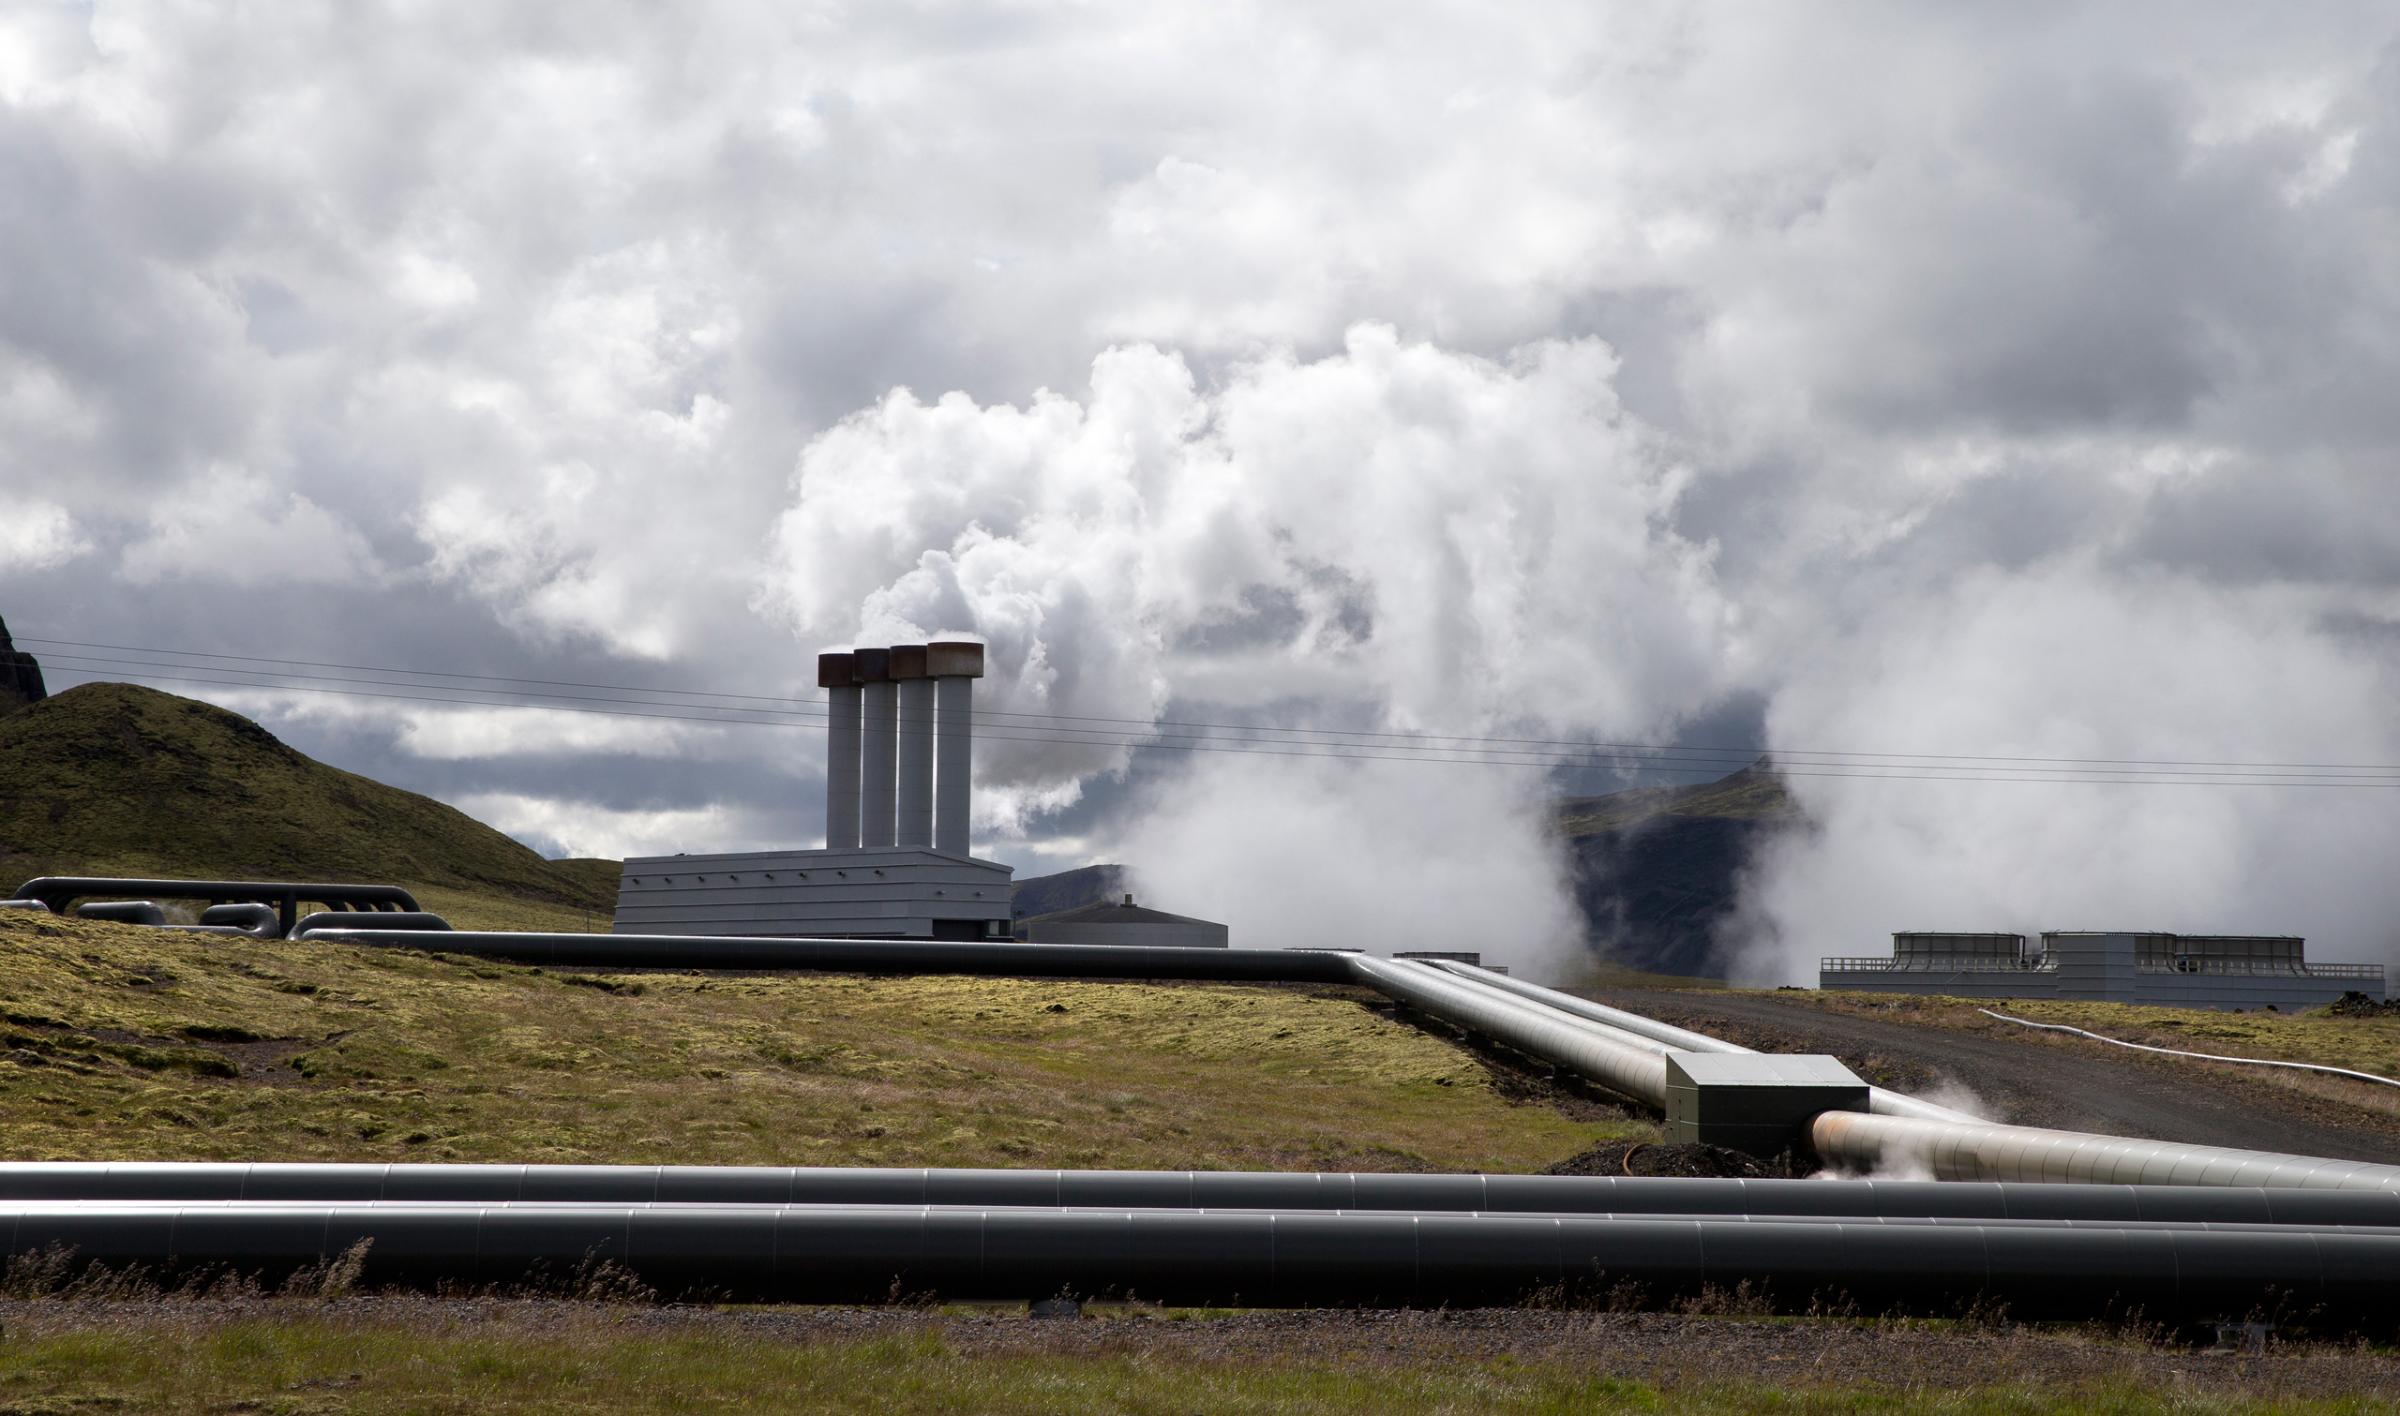 The Hellisheidi Geothermal Plant near Reykjavik, Iceland on August 14, 2015. The plant produces 303 MW elecricity and 133 MW thermal energy and supplies electricity and heating mostly to Reykjavik and area. (AP Photo/Larry MacDougal)